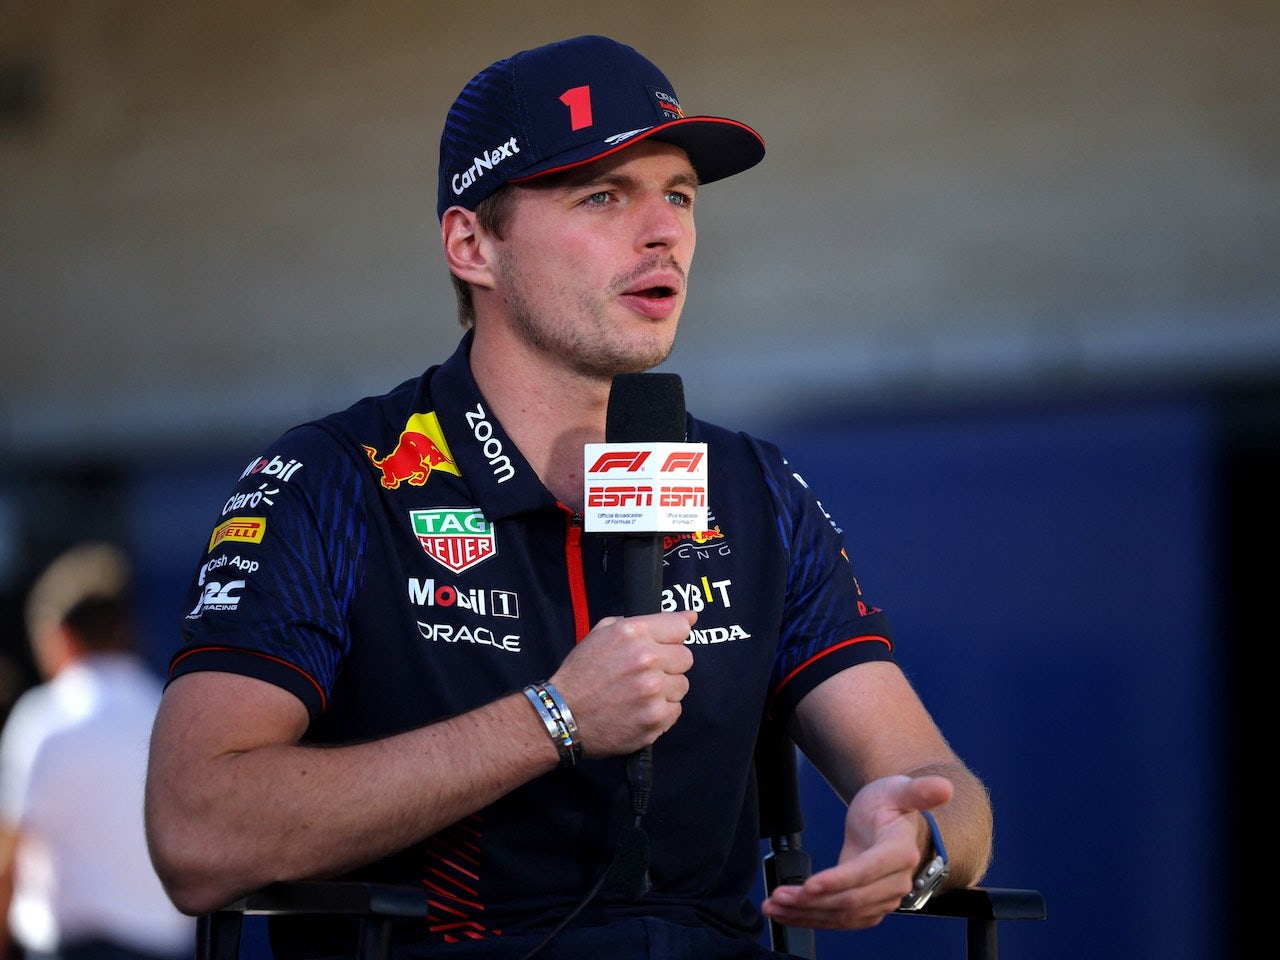 Red Bull hires bodyguards for Verstappen in Mexico